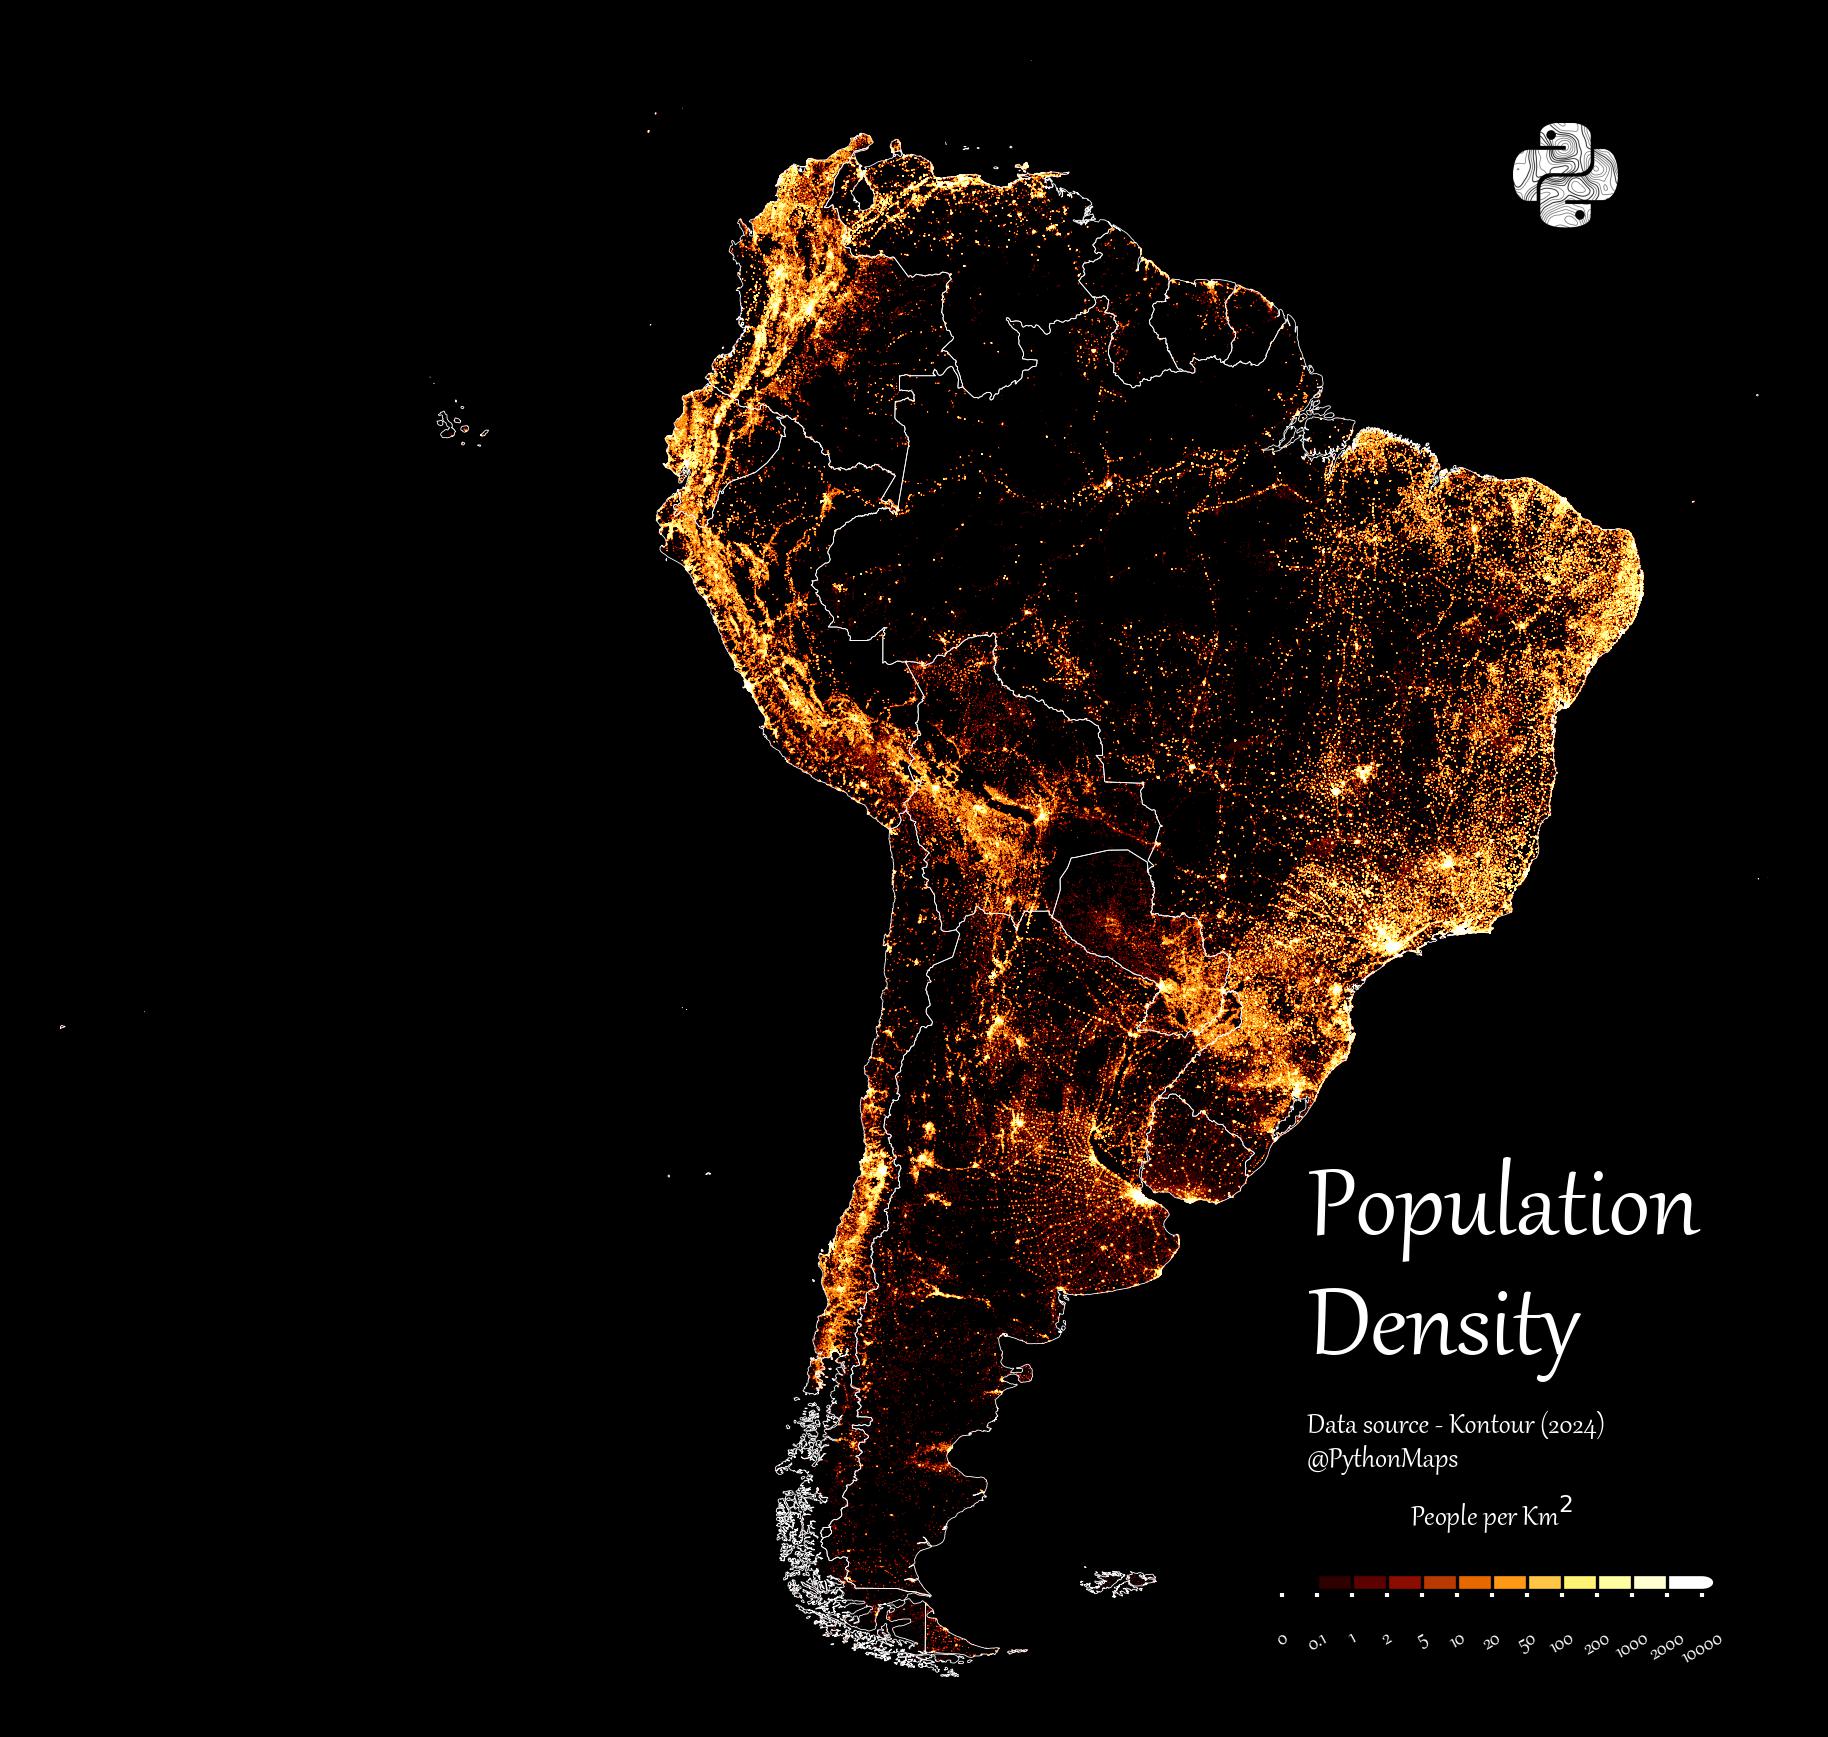 The Population density of South America